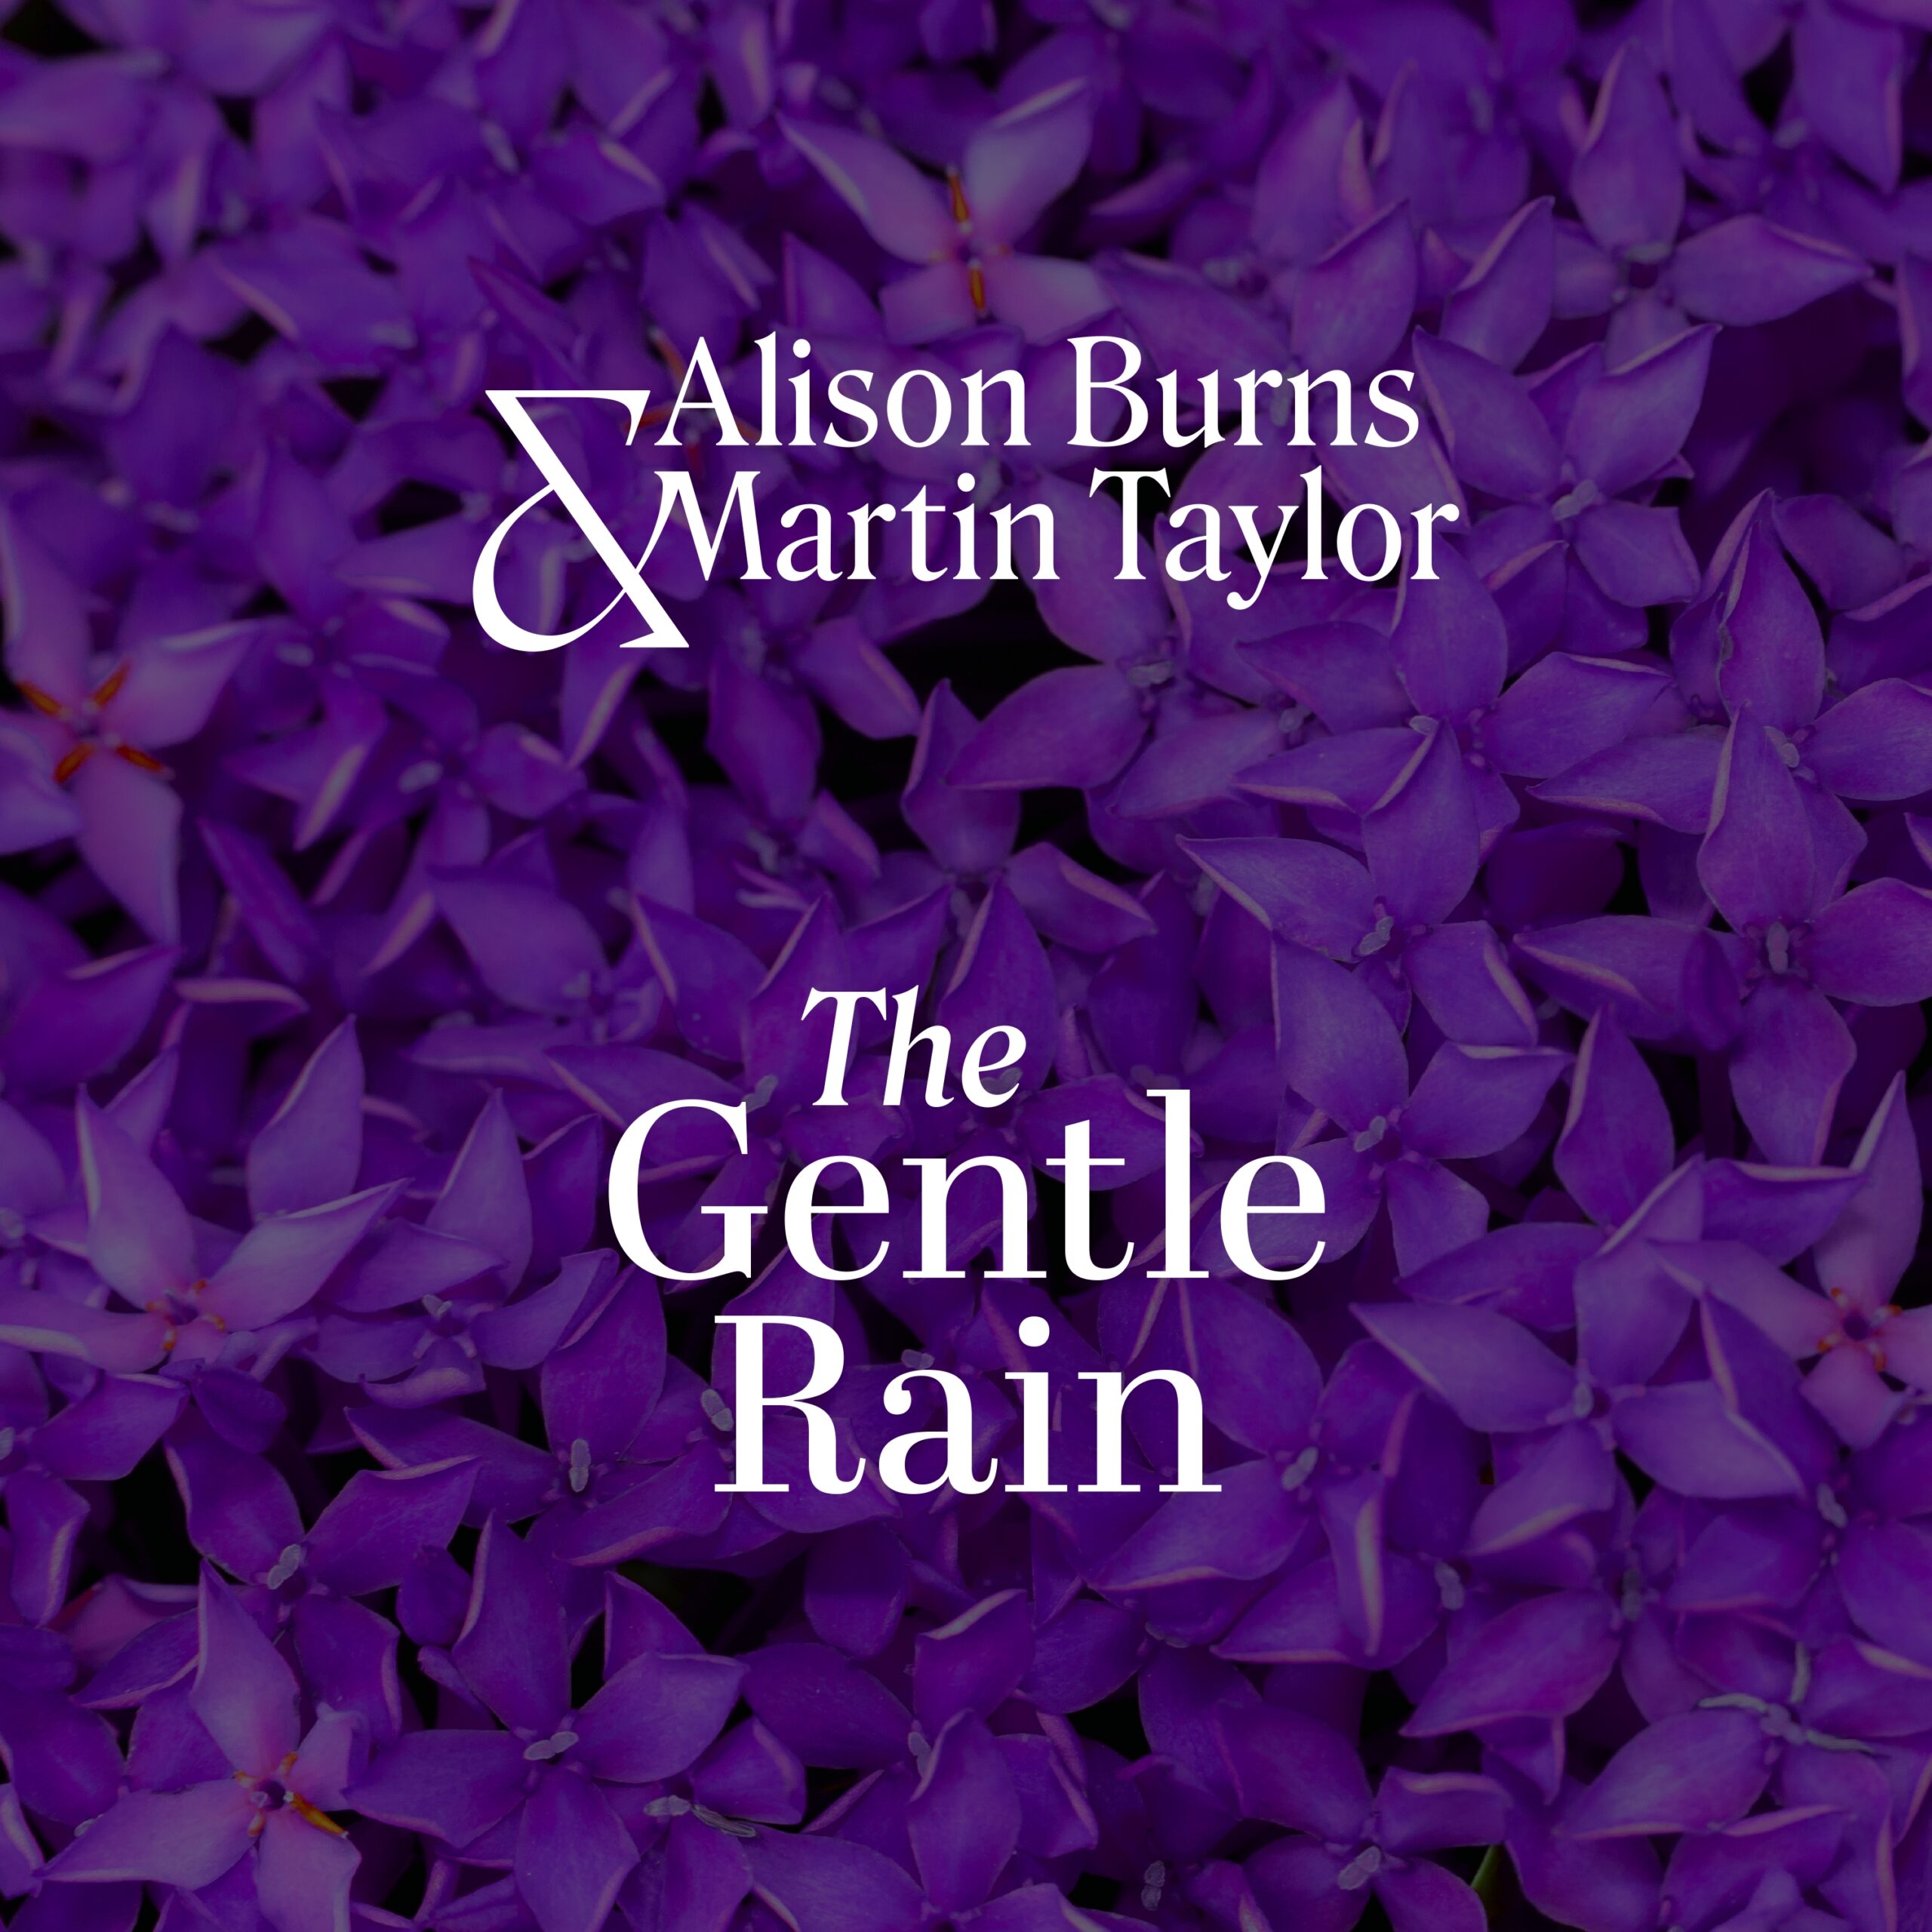 The Gentle Rain by Alison Burns and Martin Taylor